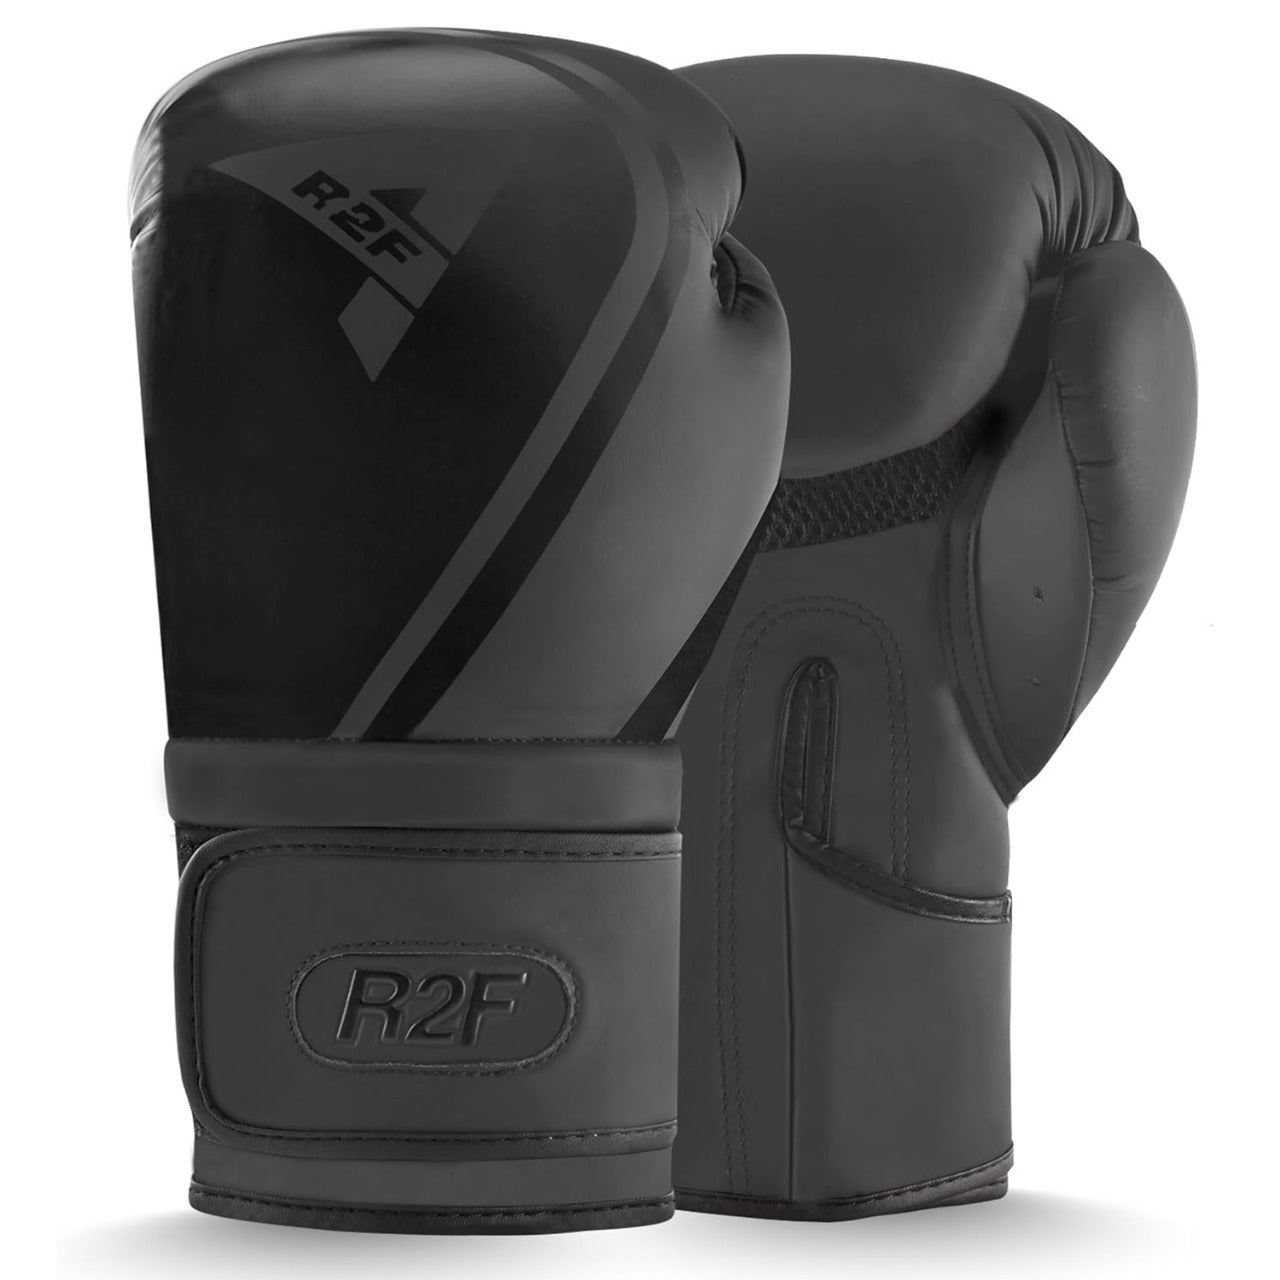 Quality R2F Gloves are a key part for your boxing training and getting ready for your match. Browse our website to chose from a wide choice of gloves, including pro-level gear, to find the perfect fit for your needs.